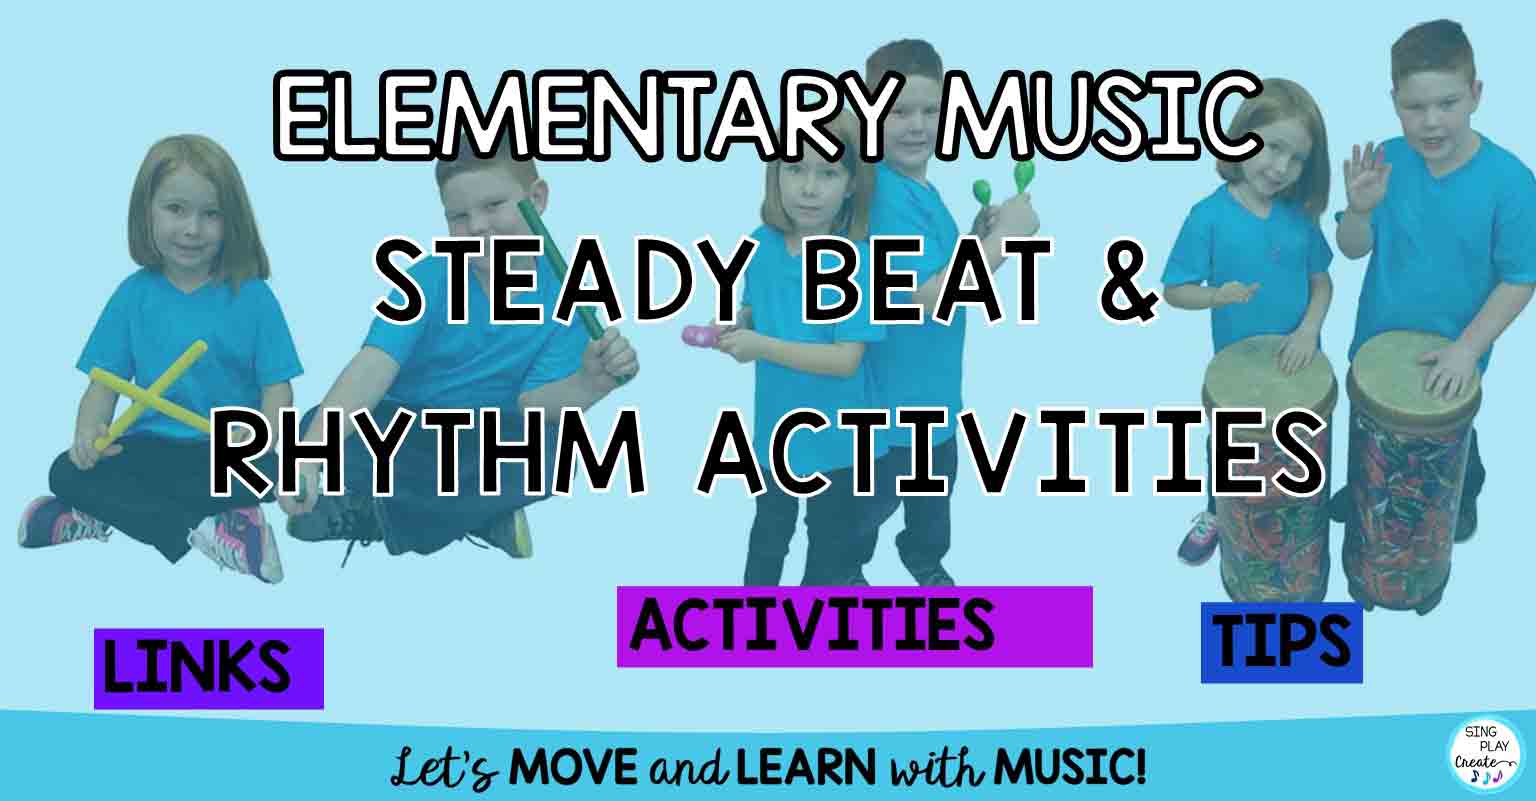 Here are some fun elementary music class STEADY BEAT and RHYTHM activities. Fun means that they are interactive and your students like them.